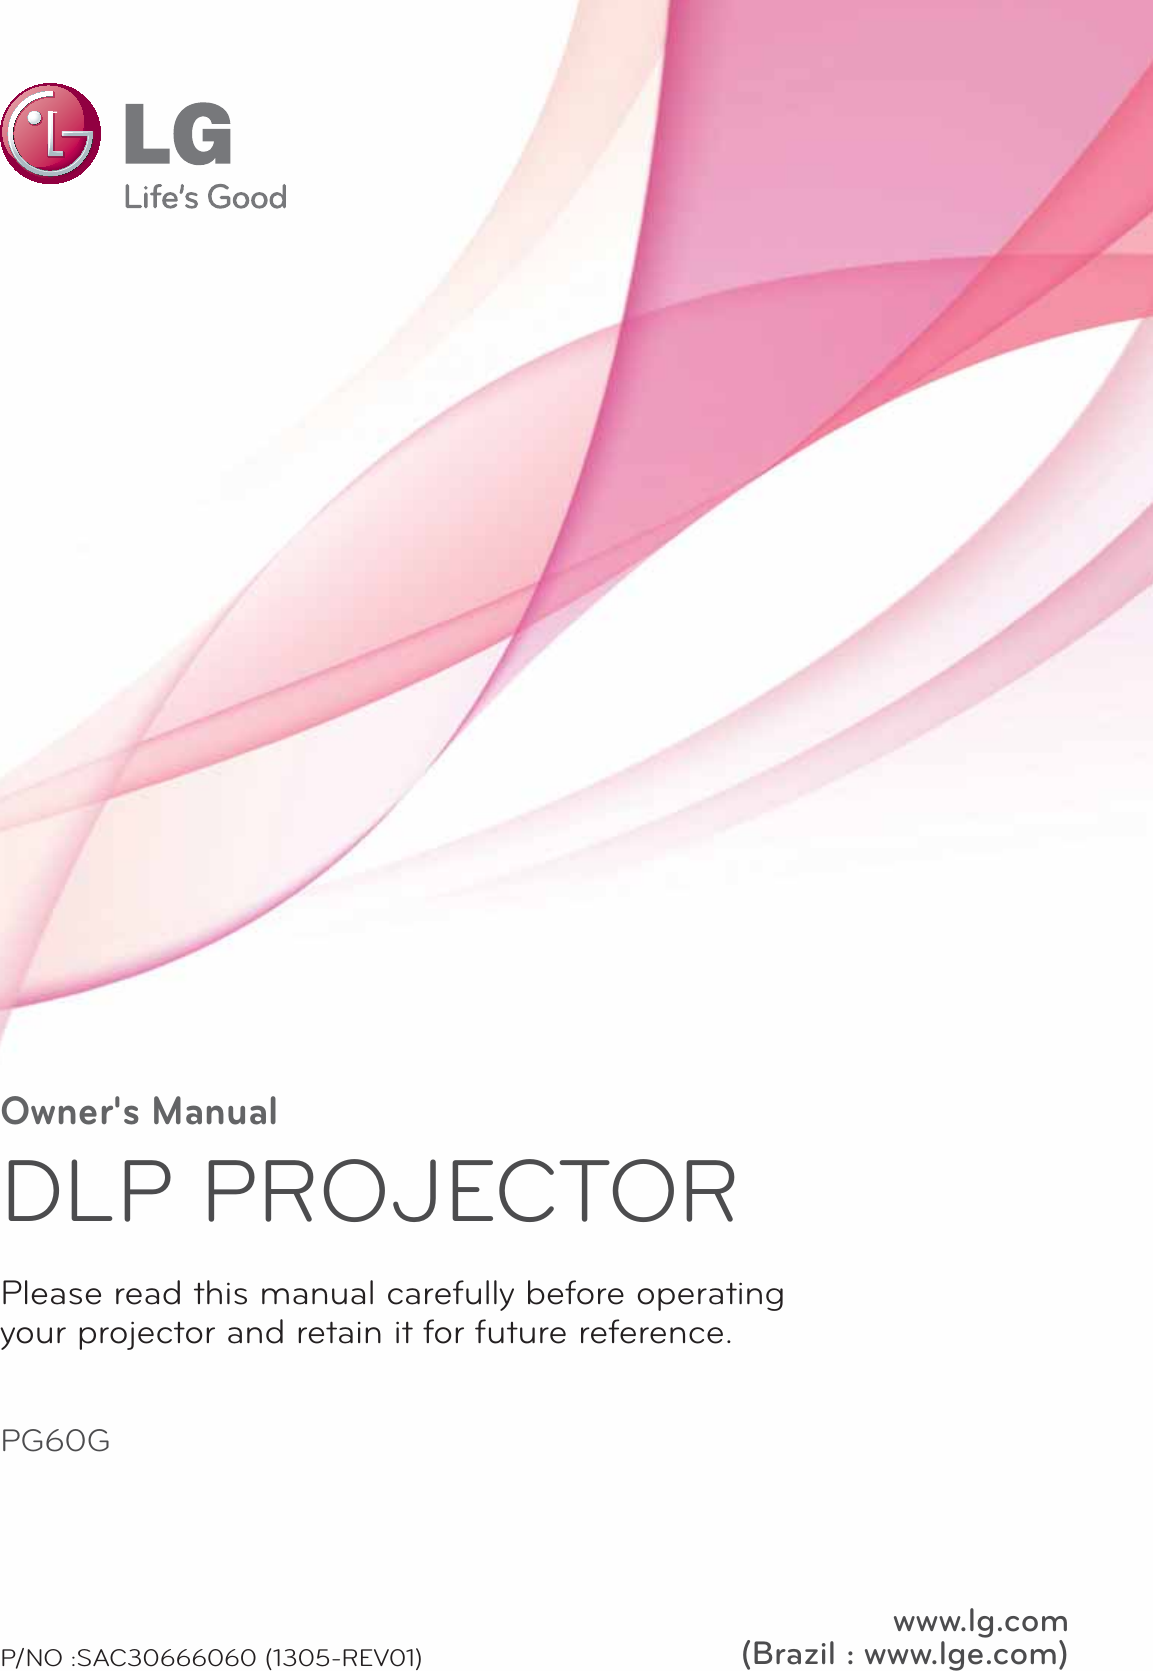 Owner&apos;s ManualDLP PROJECTORPG60GPlease read this manual carefully before operatingyour projector and retain it for future reference.www.lg.com(Brazil : www.lge.com)P/NO :SAC30666060 (1305-REV01)